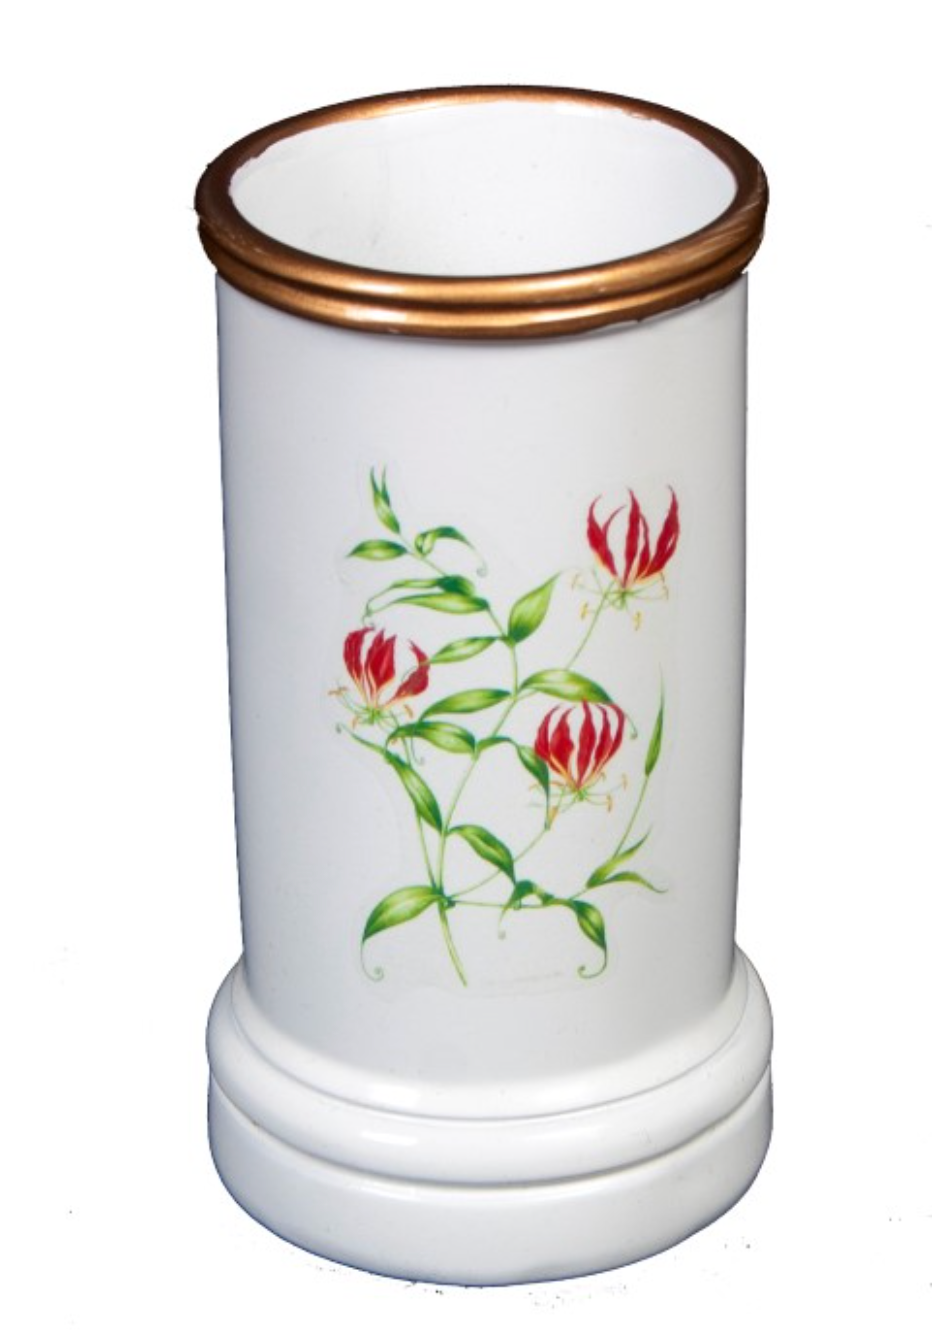 Spill Vase: Flame Lily